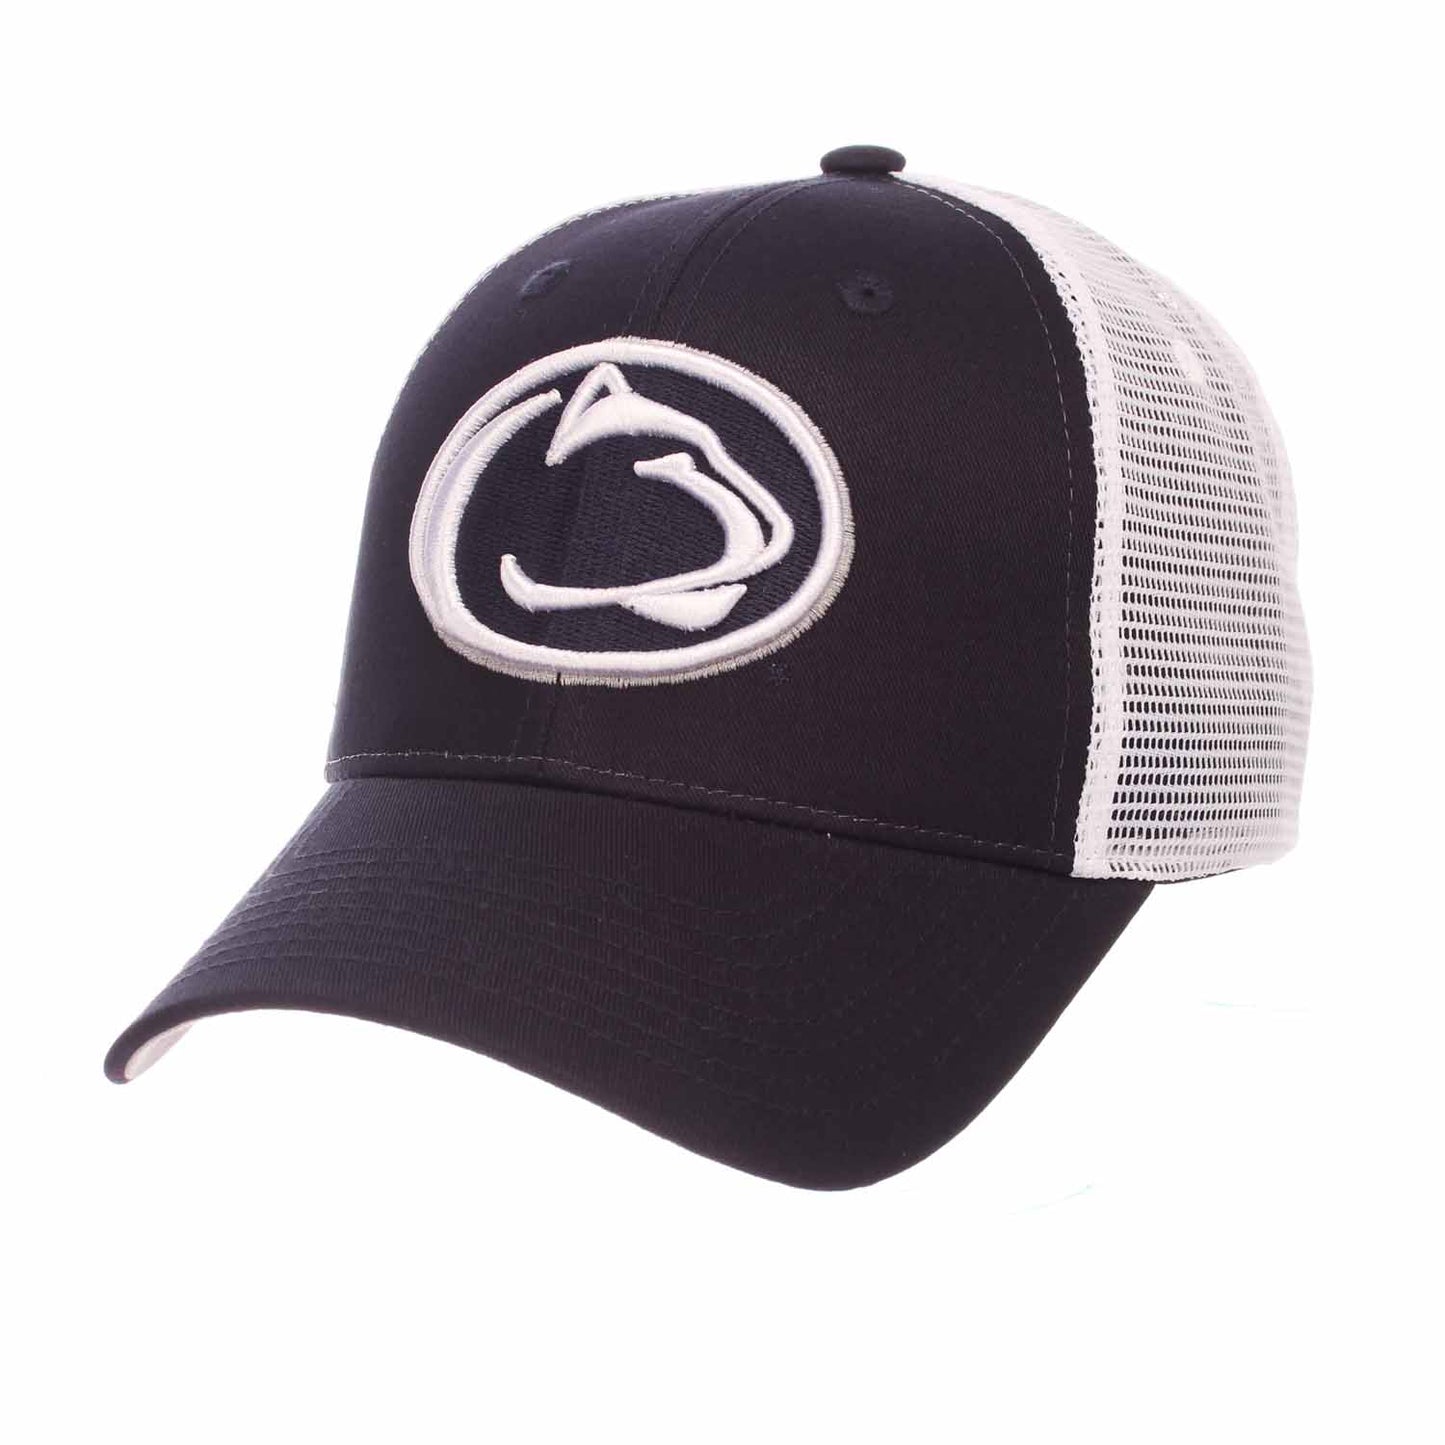 Penn State Nittany Lions Adult Rivalry Structured Meshback Adjustable Hat  - Team Color